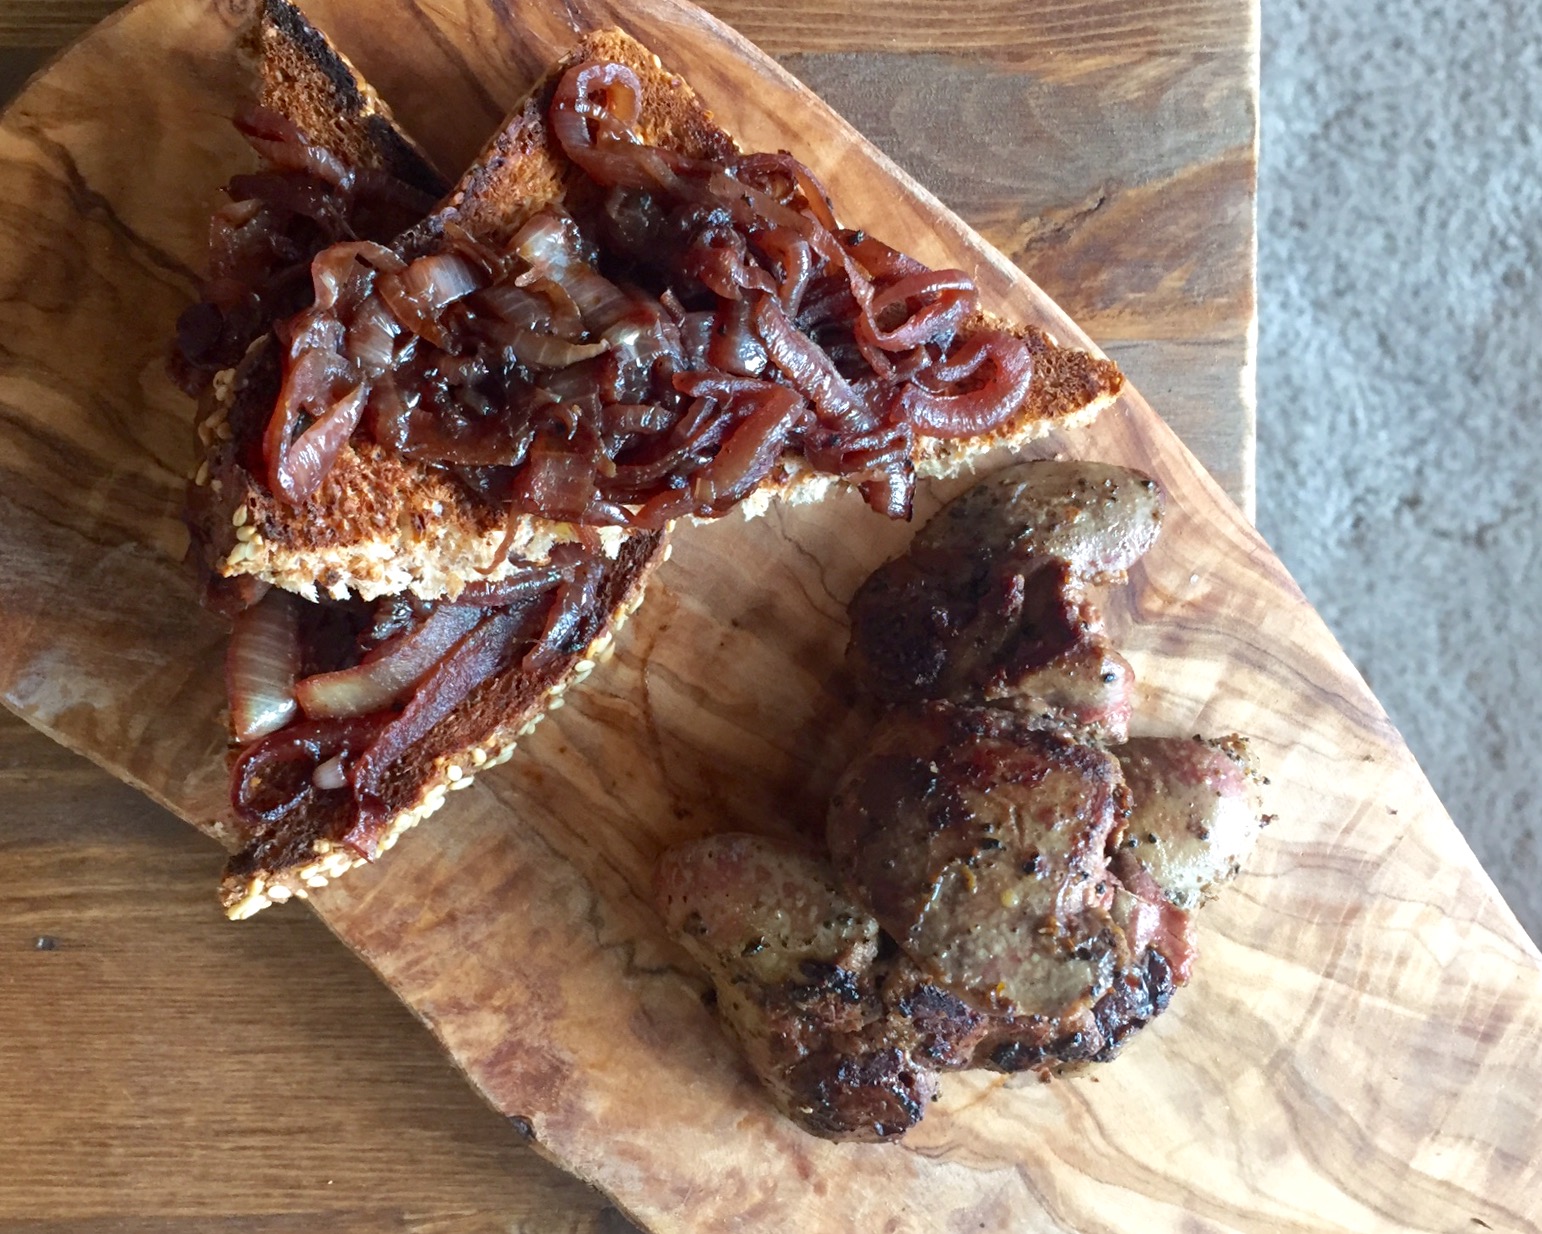 peasant’s foie gras – chicken liver with red wine onion on toast